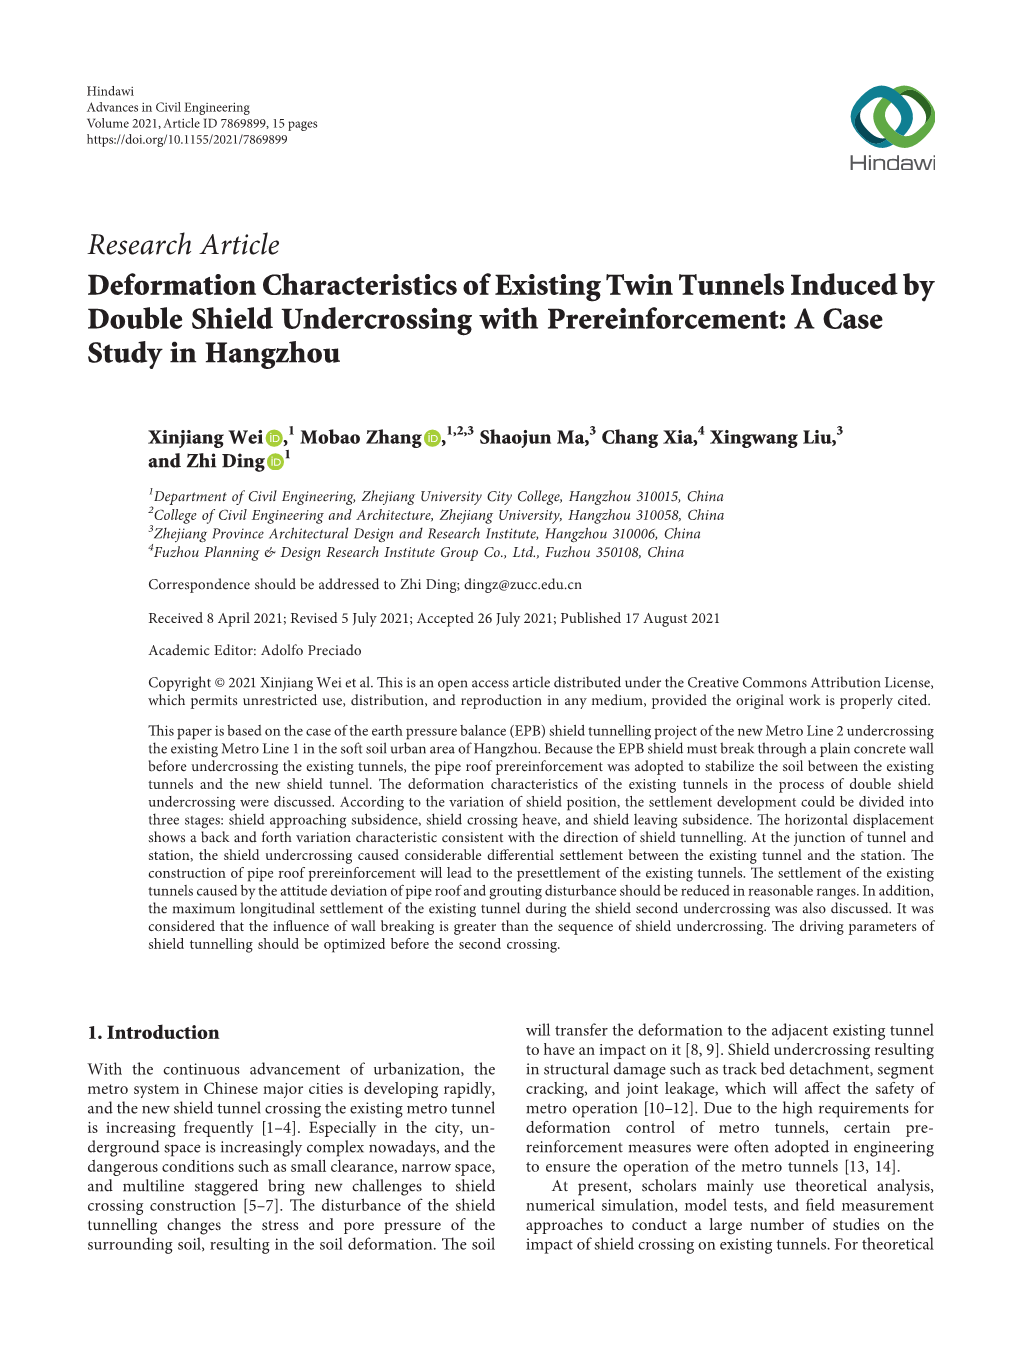 Deformation Characteristics of Existing Twin Tunnels Induced by Double Shield Undercrossing with Prereinforcement: a Case Study in Hangzhou